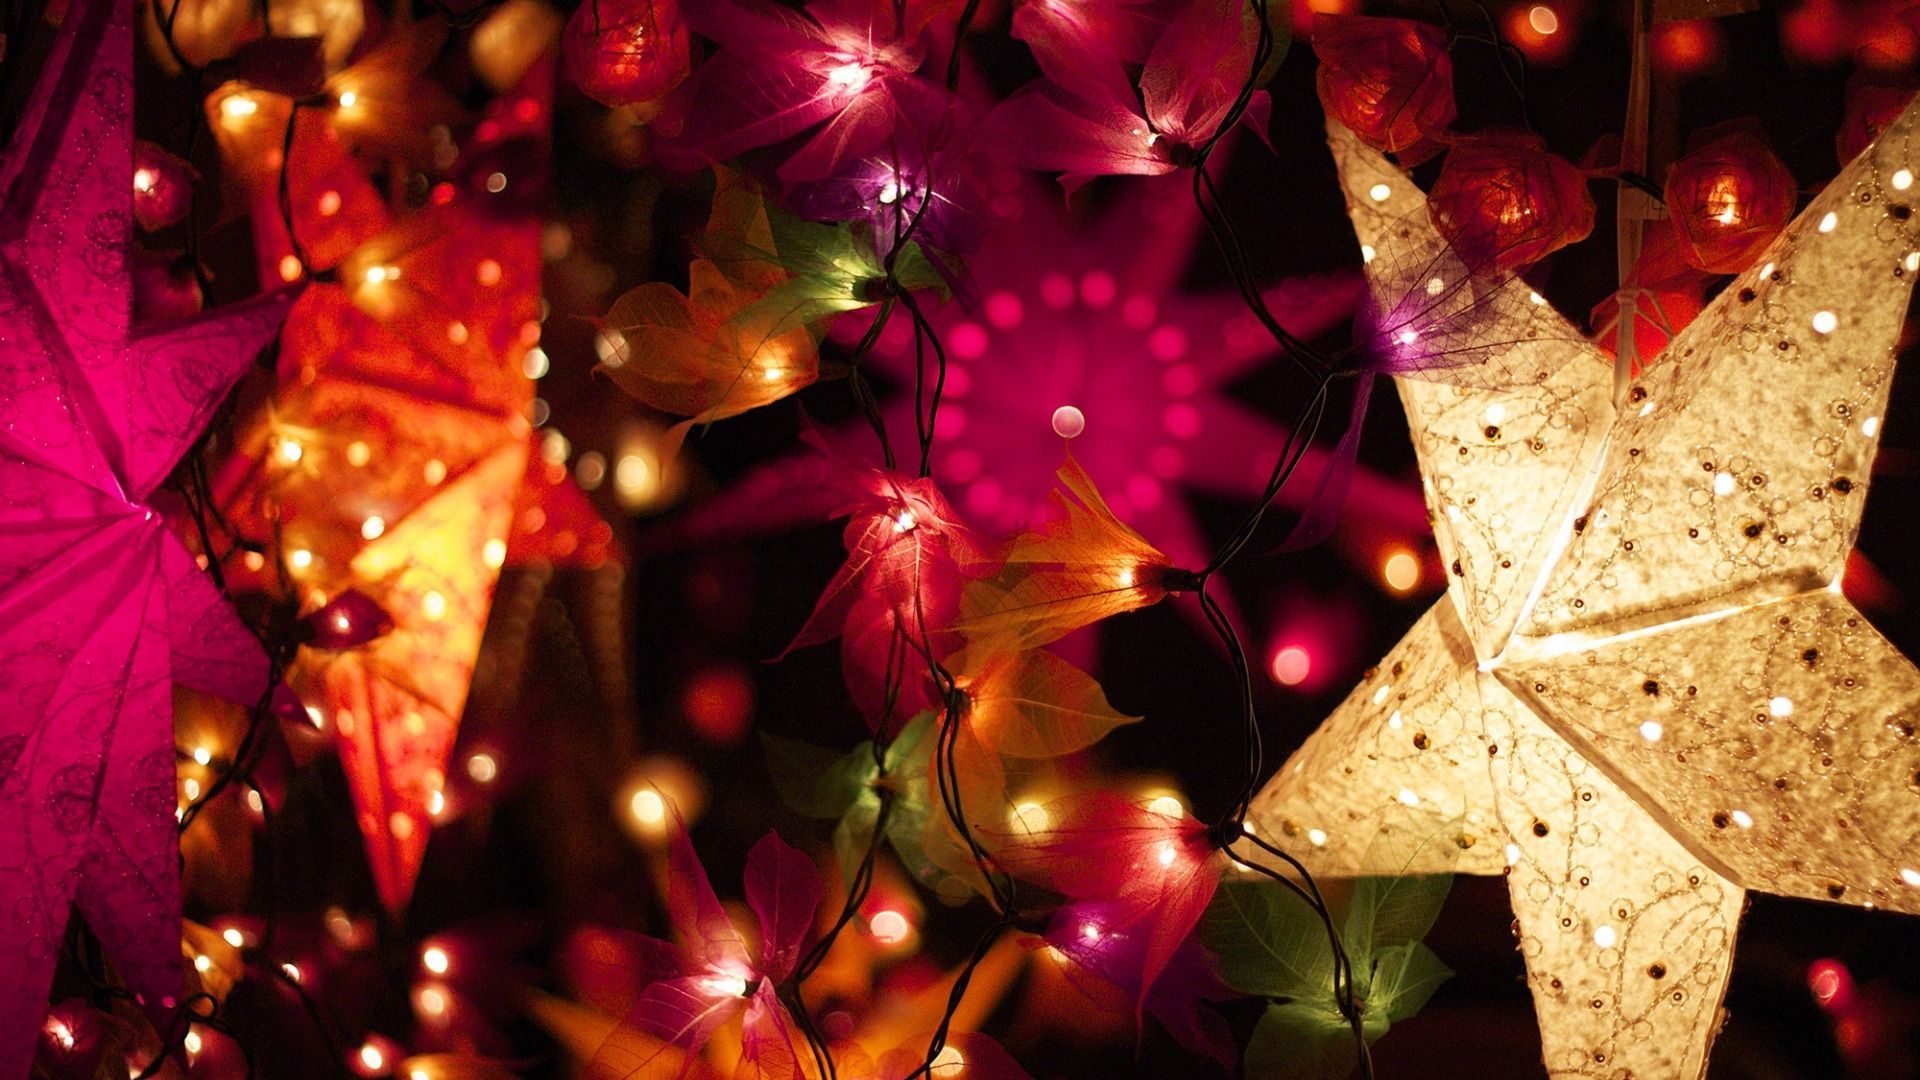 Download wallpaper New Year, garland, colorful, holidays, winter